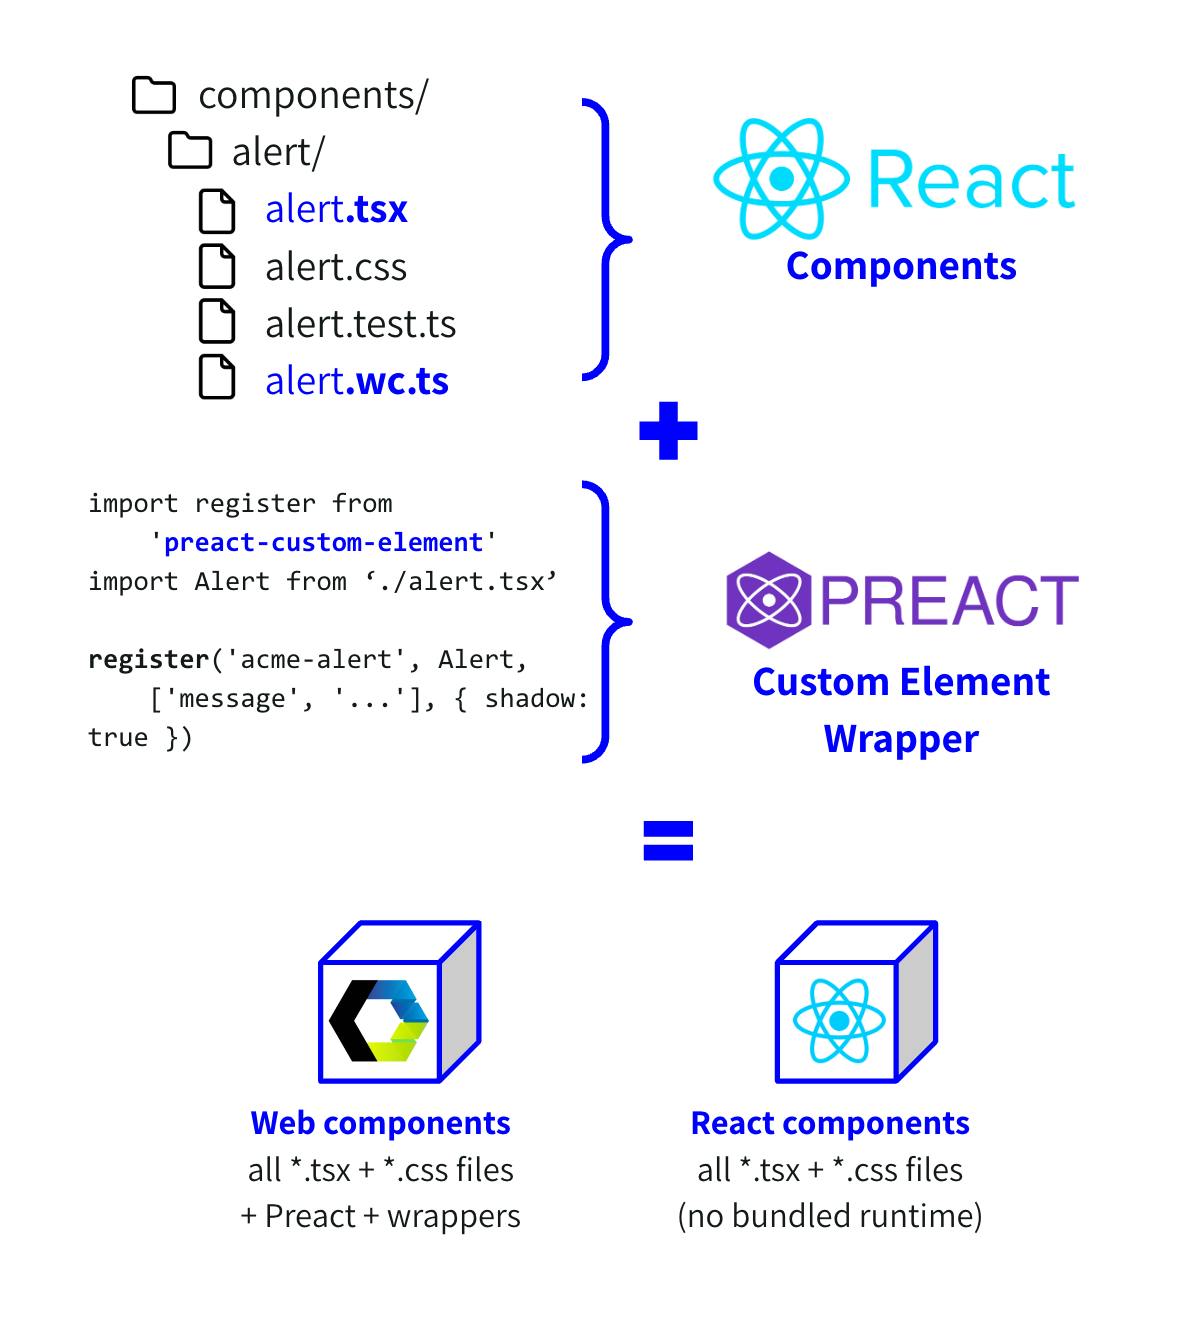 Develop components using React and also compile them to Web Components using a Preact wrapper